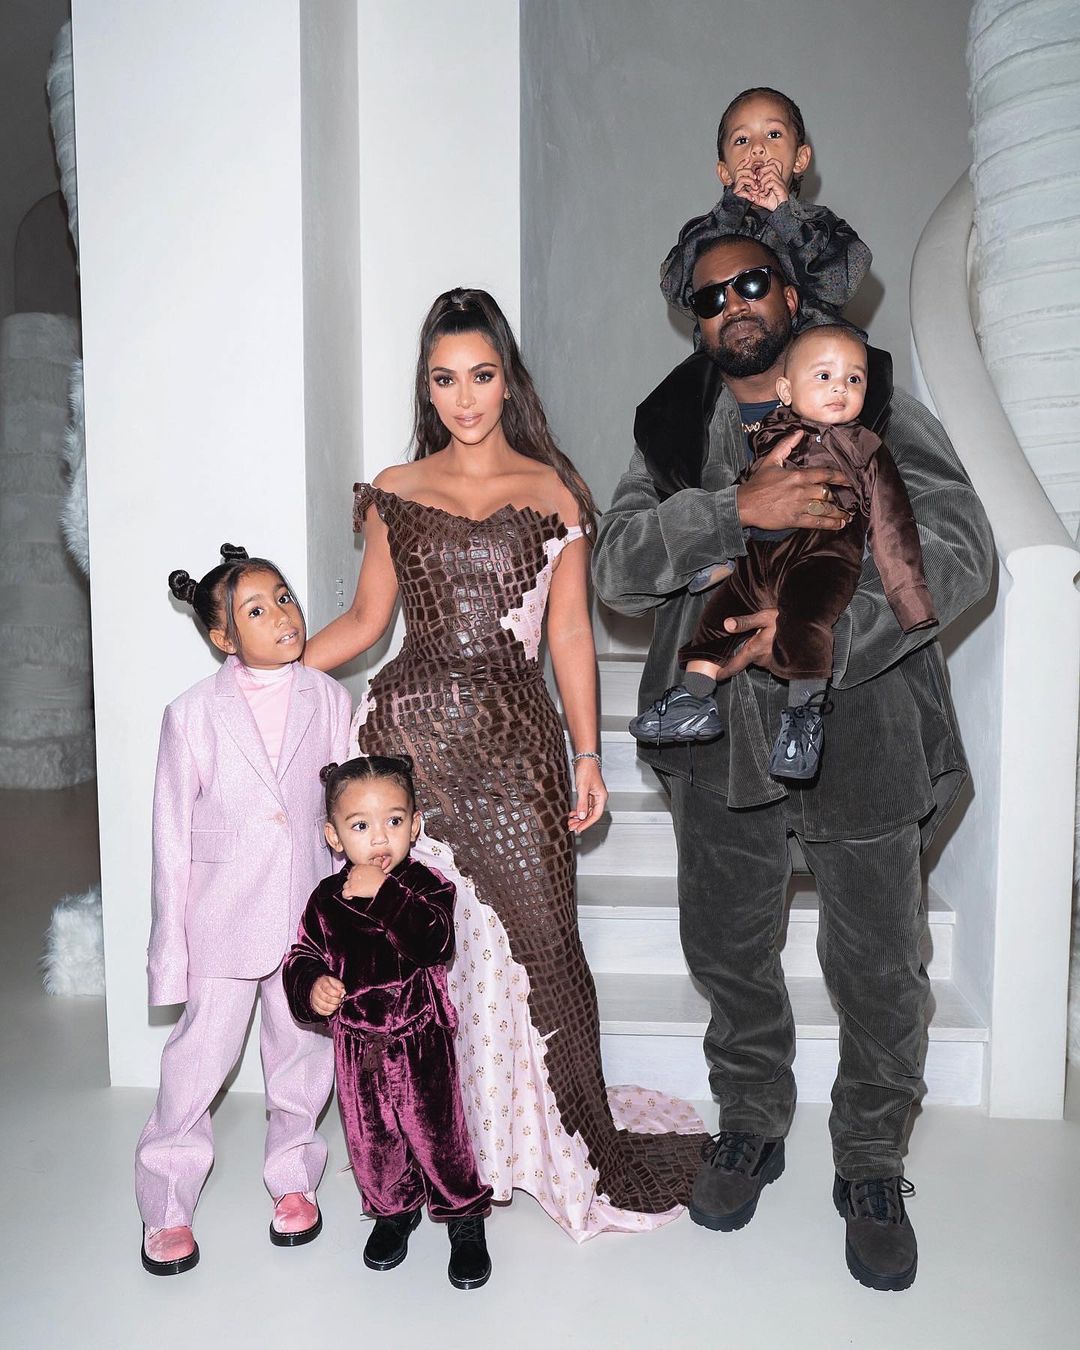 Kim and Kanye West took a group photo with their kids in 2019